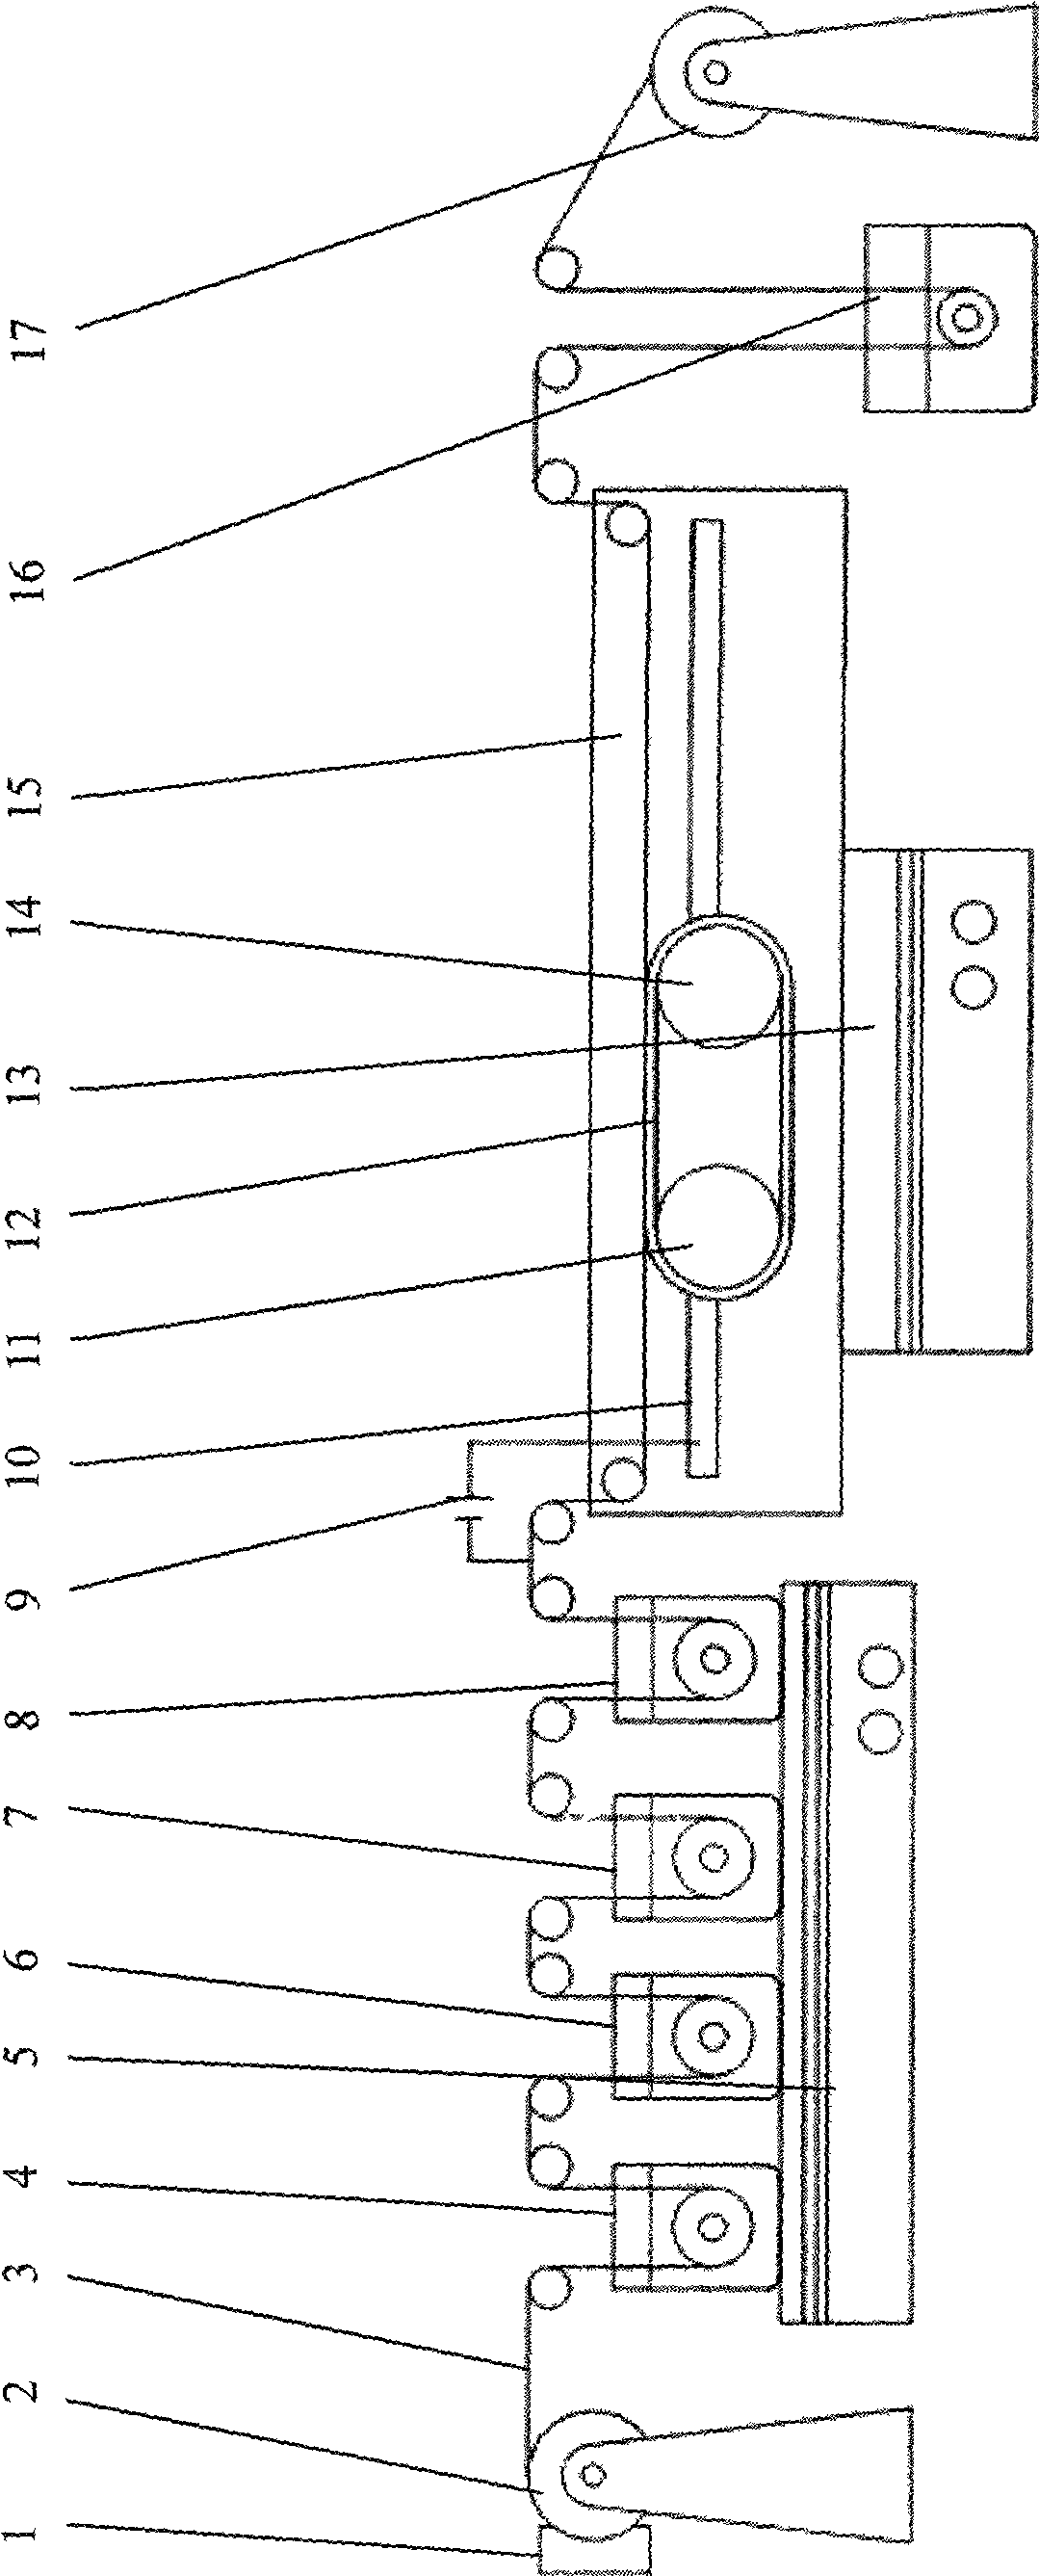 A method for manufacturing electroplating diamond wire saw